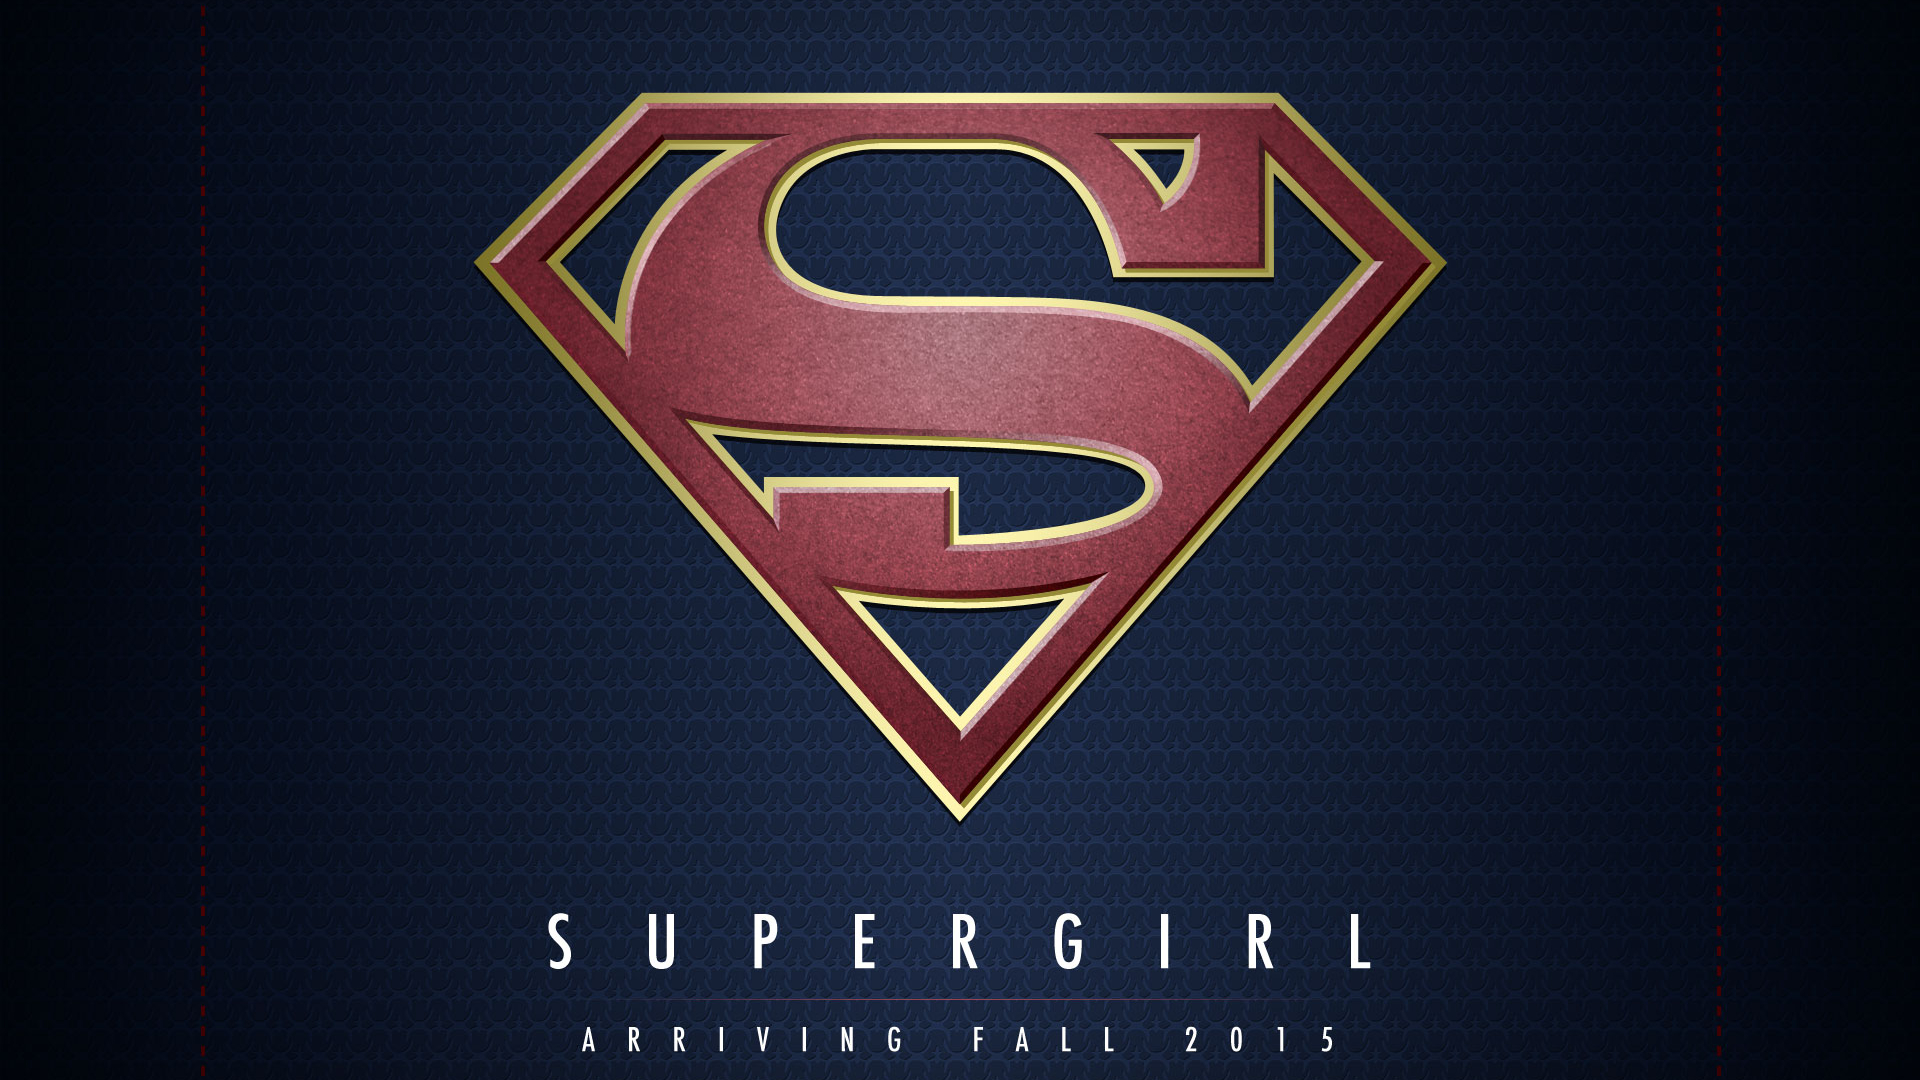 Free download Supergirl TV Wallpaper High Resolution and Quality Download [1920x1280] for your Desktop, Mobile & Tablet. Explore Supergirl TV Wallpaper. Supergirl CBS Wallpaper, Supergirl TV Series Wallpaper, Supergirl Wallpaper 1080p